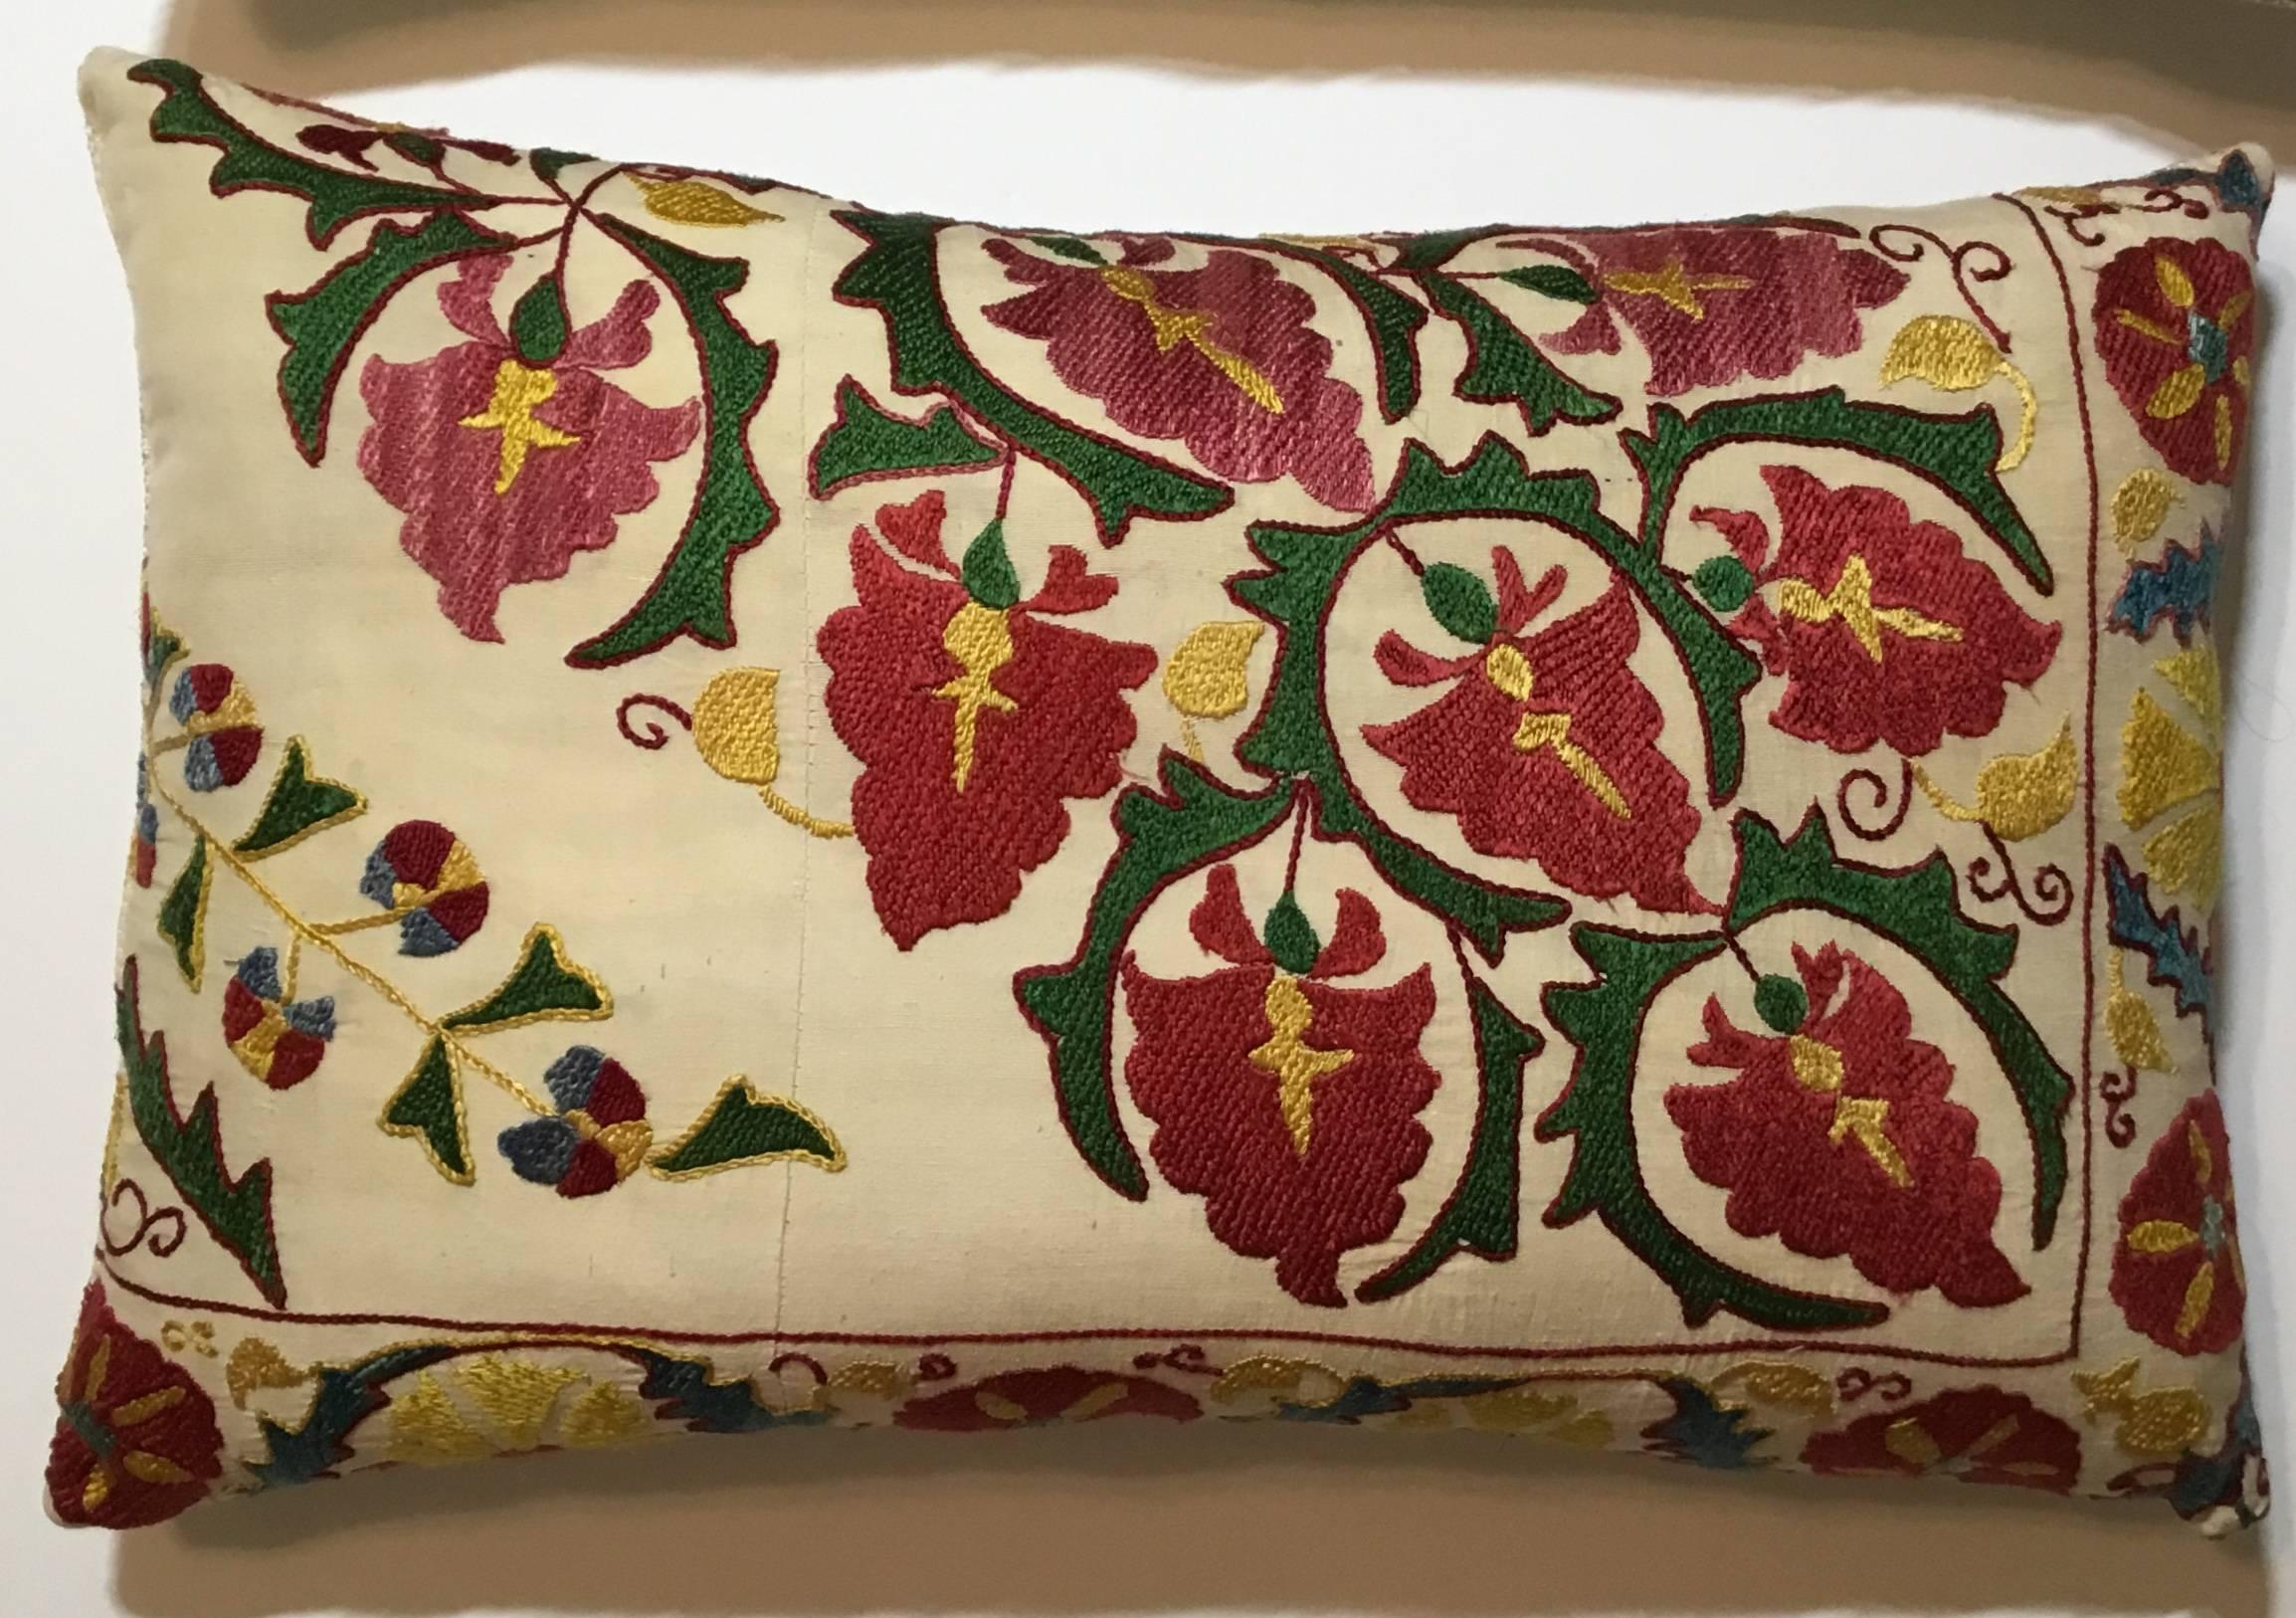 Beautiful pair of pillow made of hand embroidery silk of cotton background, with exceptional vibrant colors of red, gold, green and indigo in a vine and flowers motifs.
Cotton background, frash inserts.
Sizes:
15” x 24”
14” x 23”.